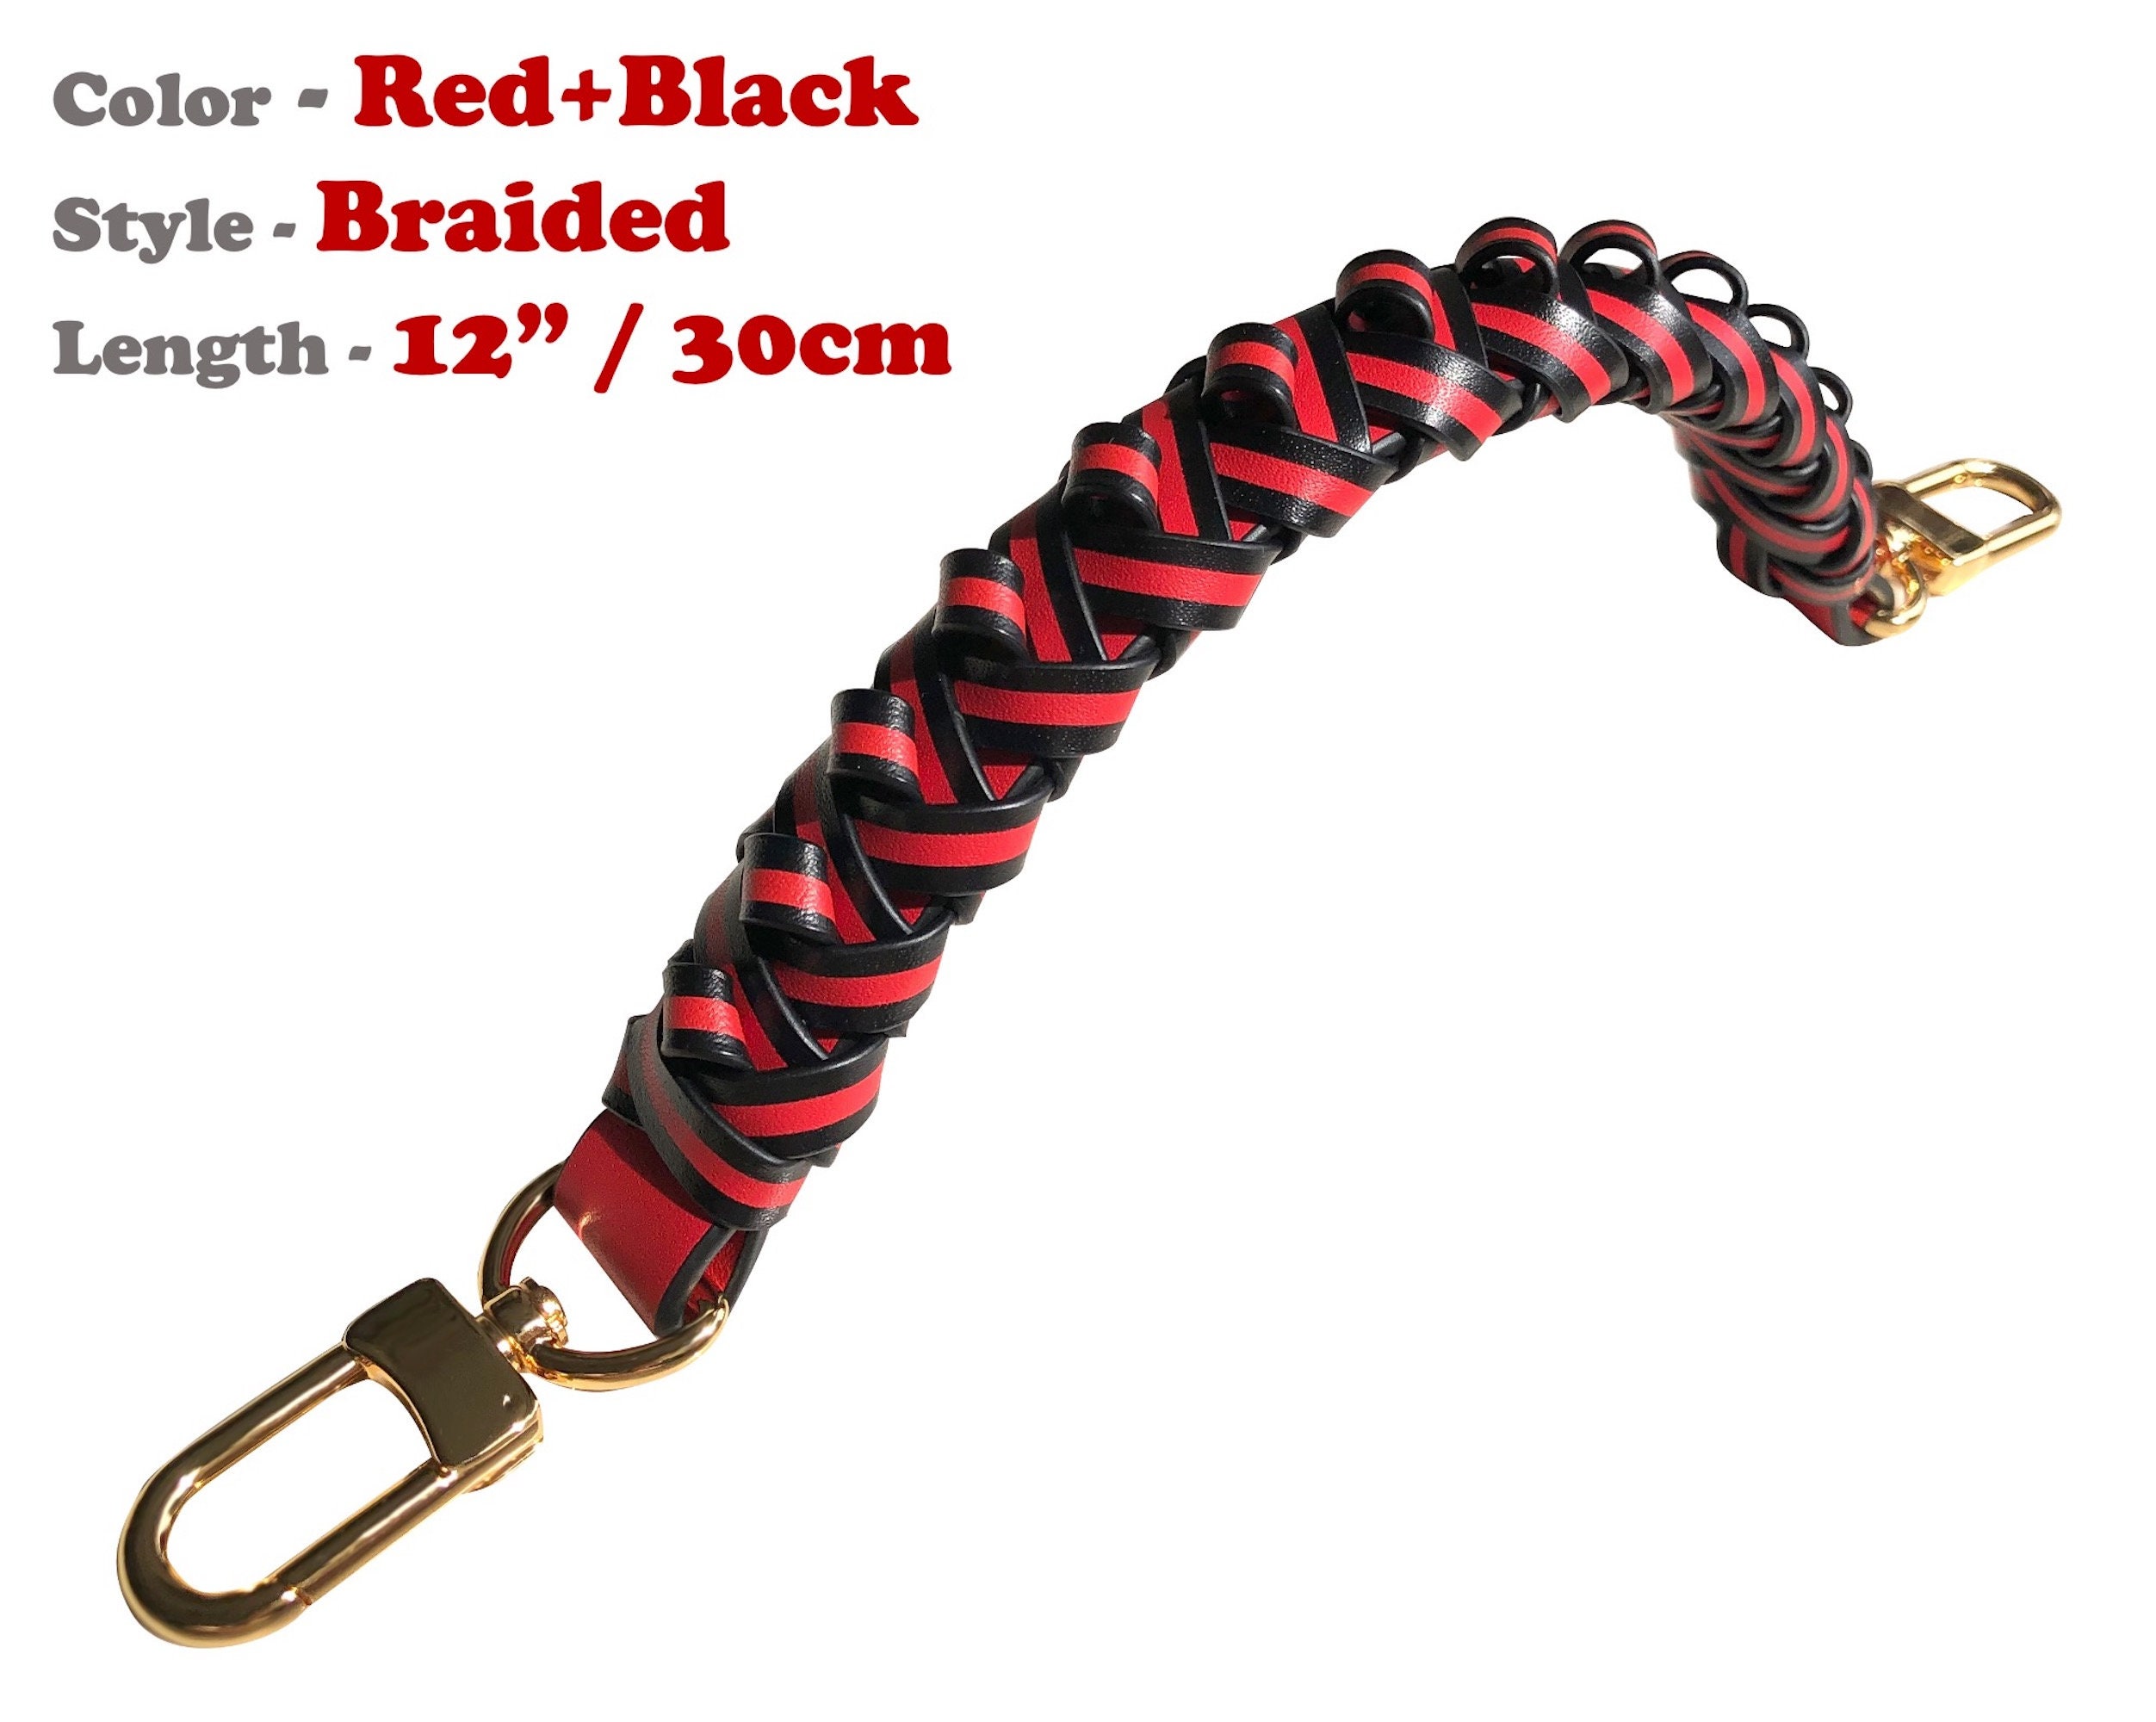  18 Inches Vachetta Leather Braided Handle, Top Braided